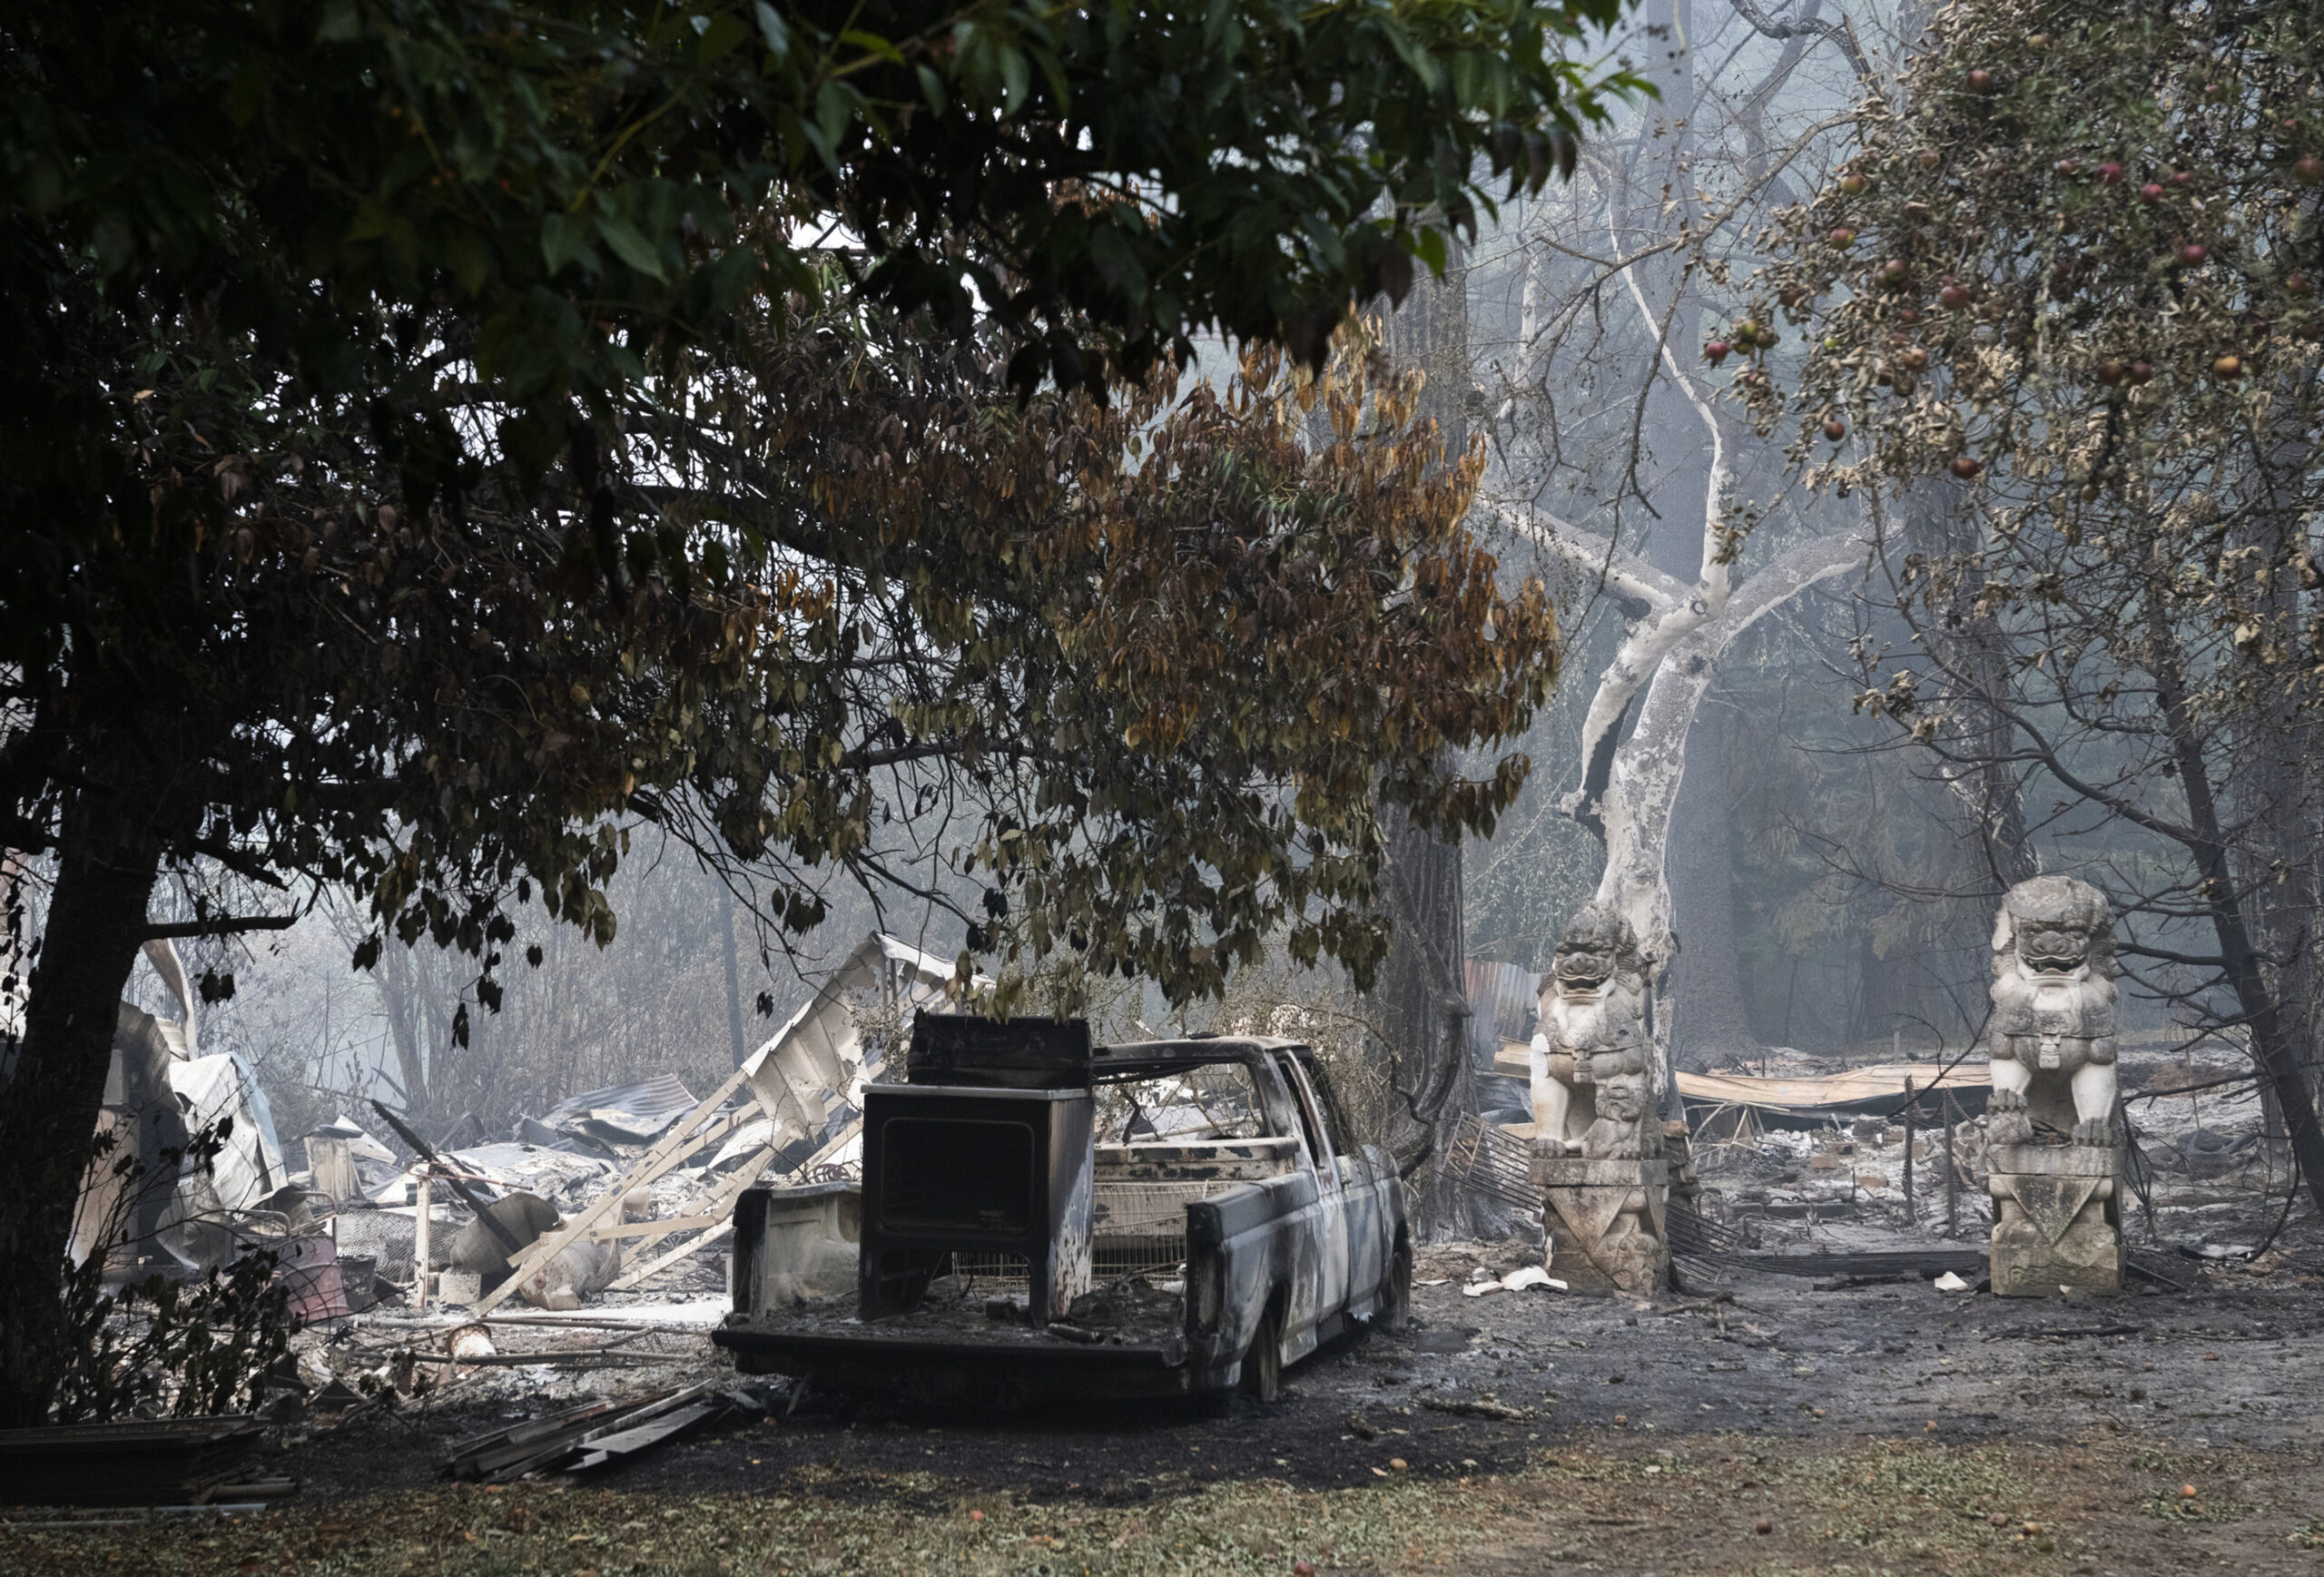 A burned house near the Riverside fire on September 14, 2020 in Estacada, Oregon. Some residents chose to return to their homes as favorable weather helped slow the fire’s spread.